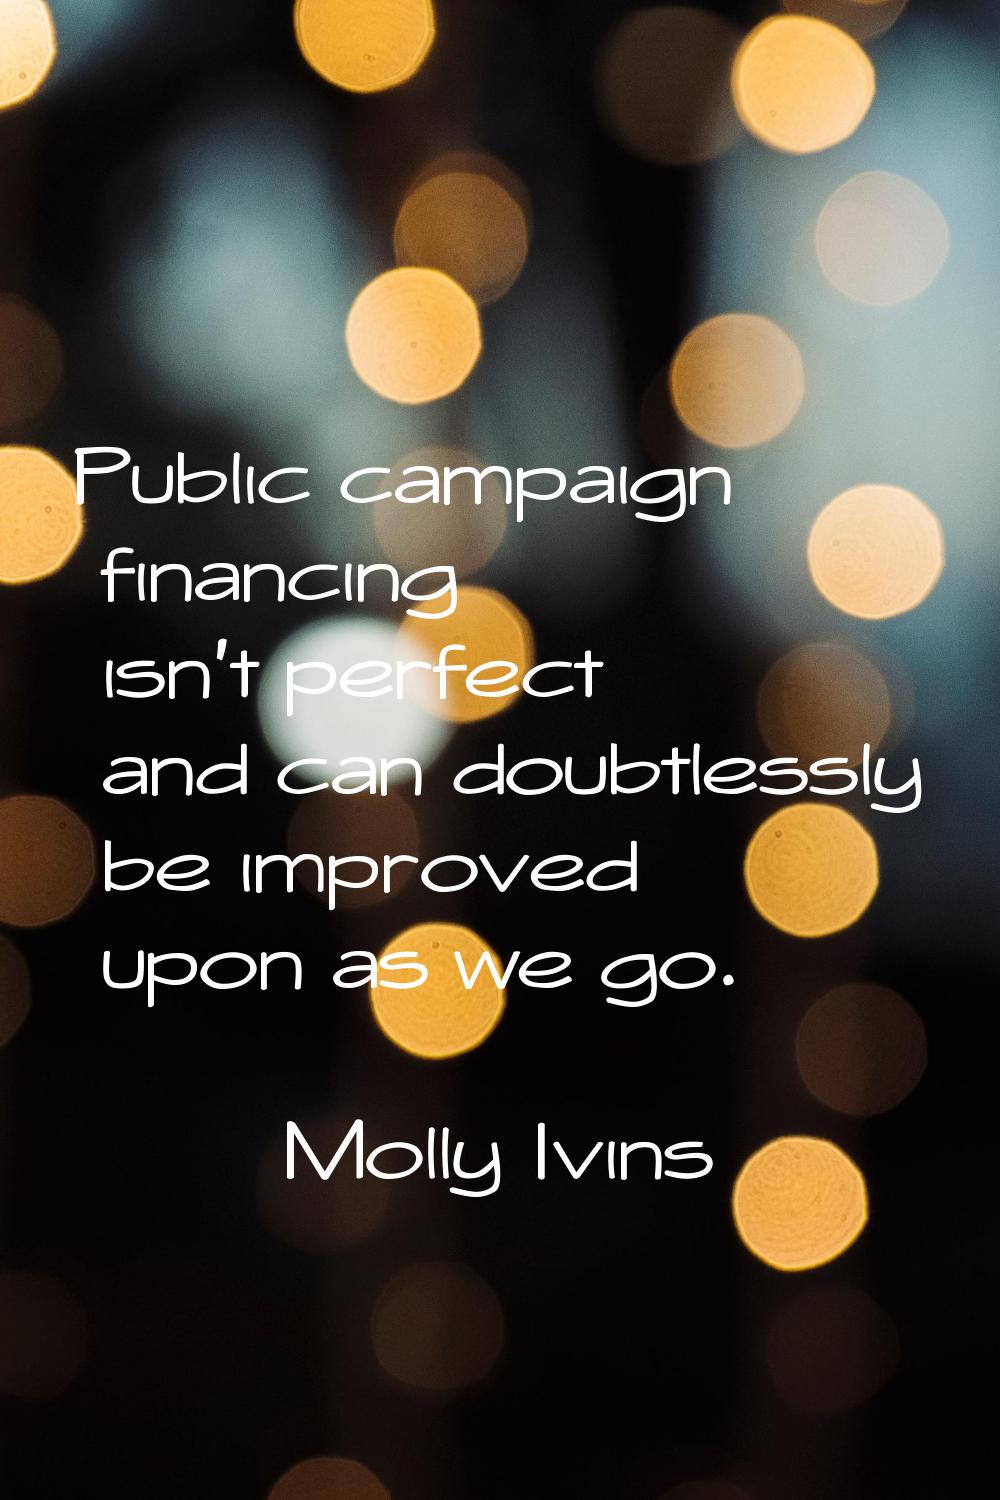 Public campaign financing isn't perfect and can doubtlessly be improved upon as we go.